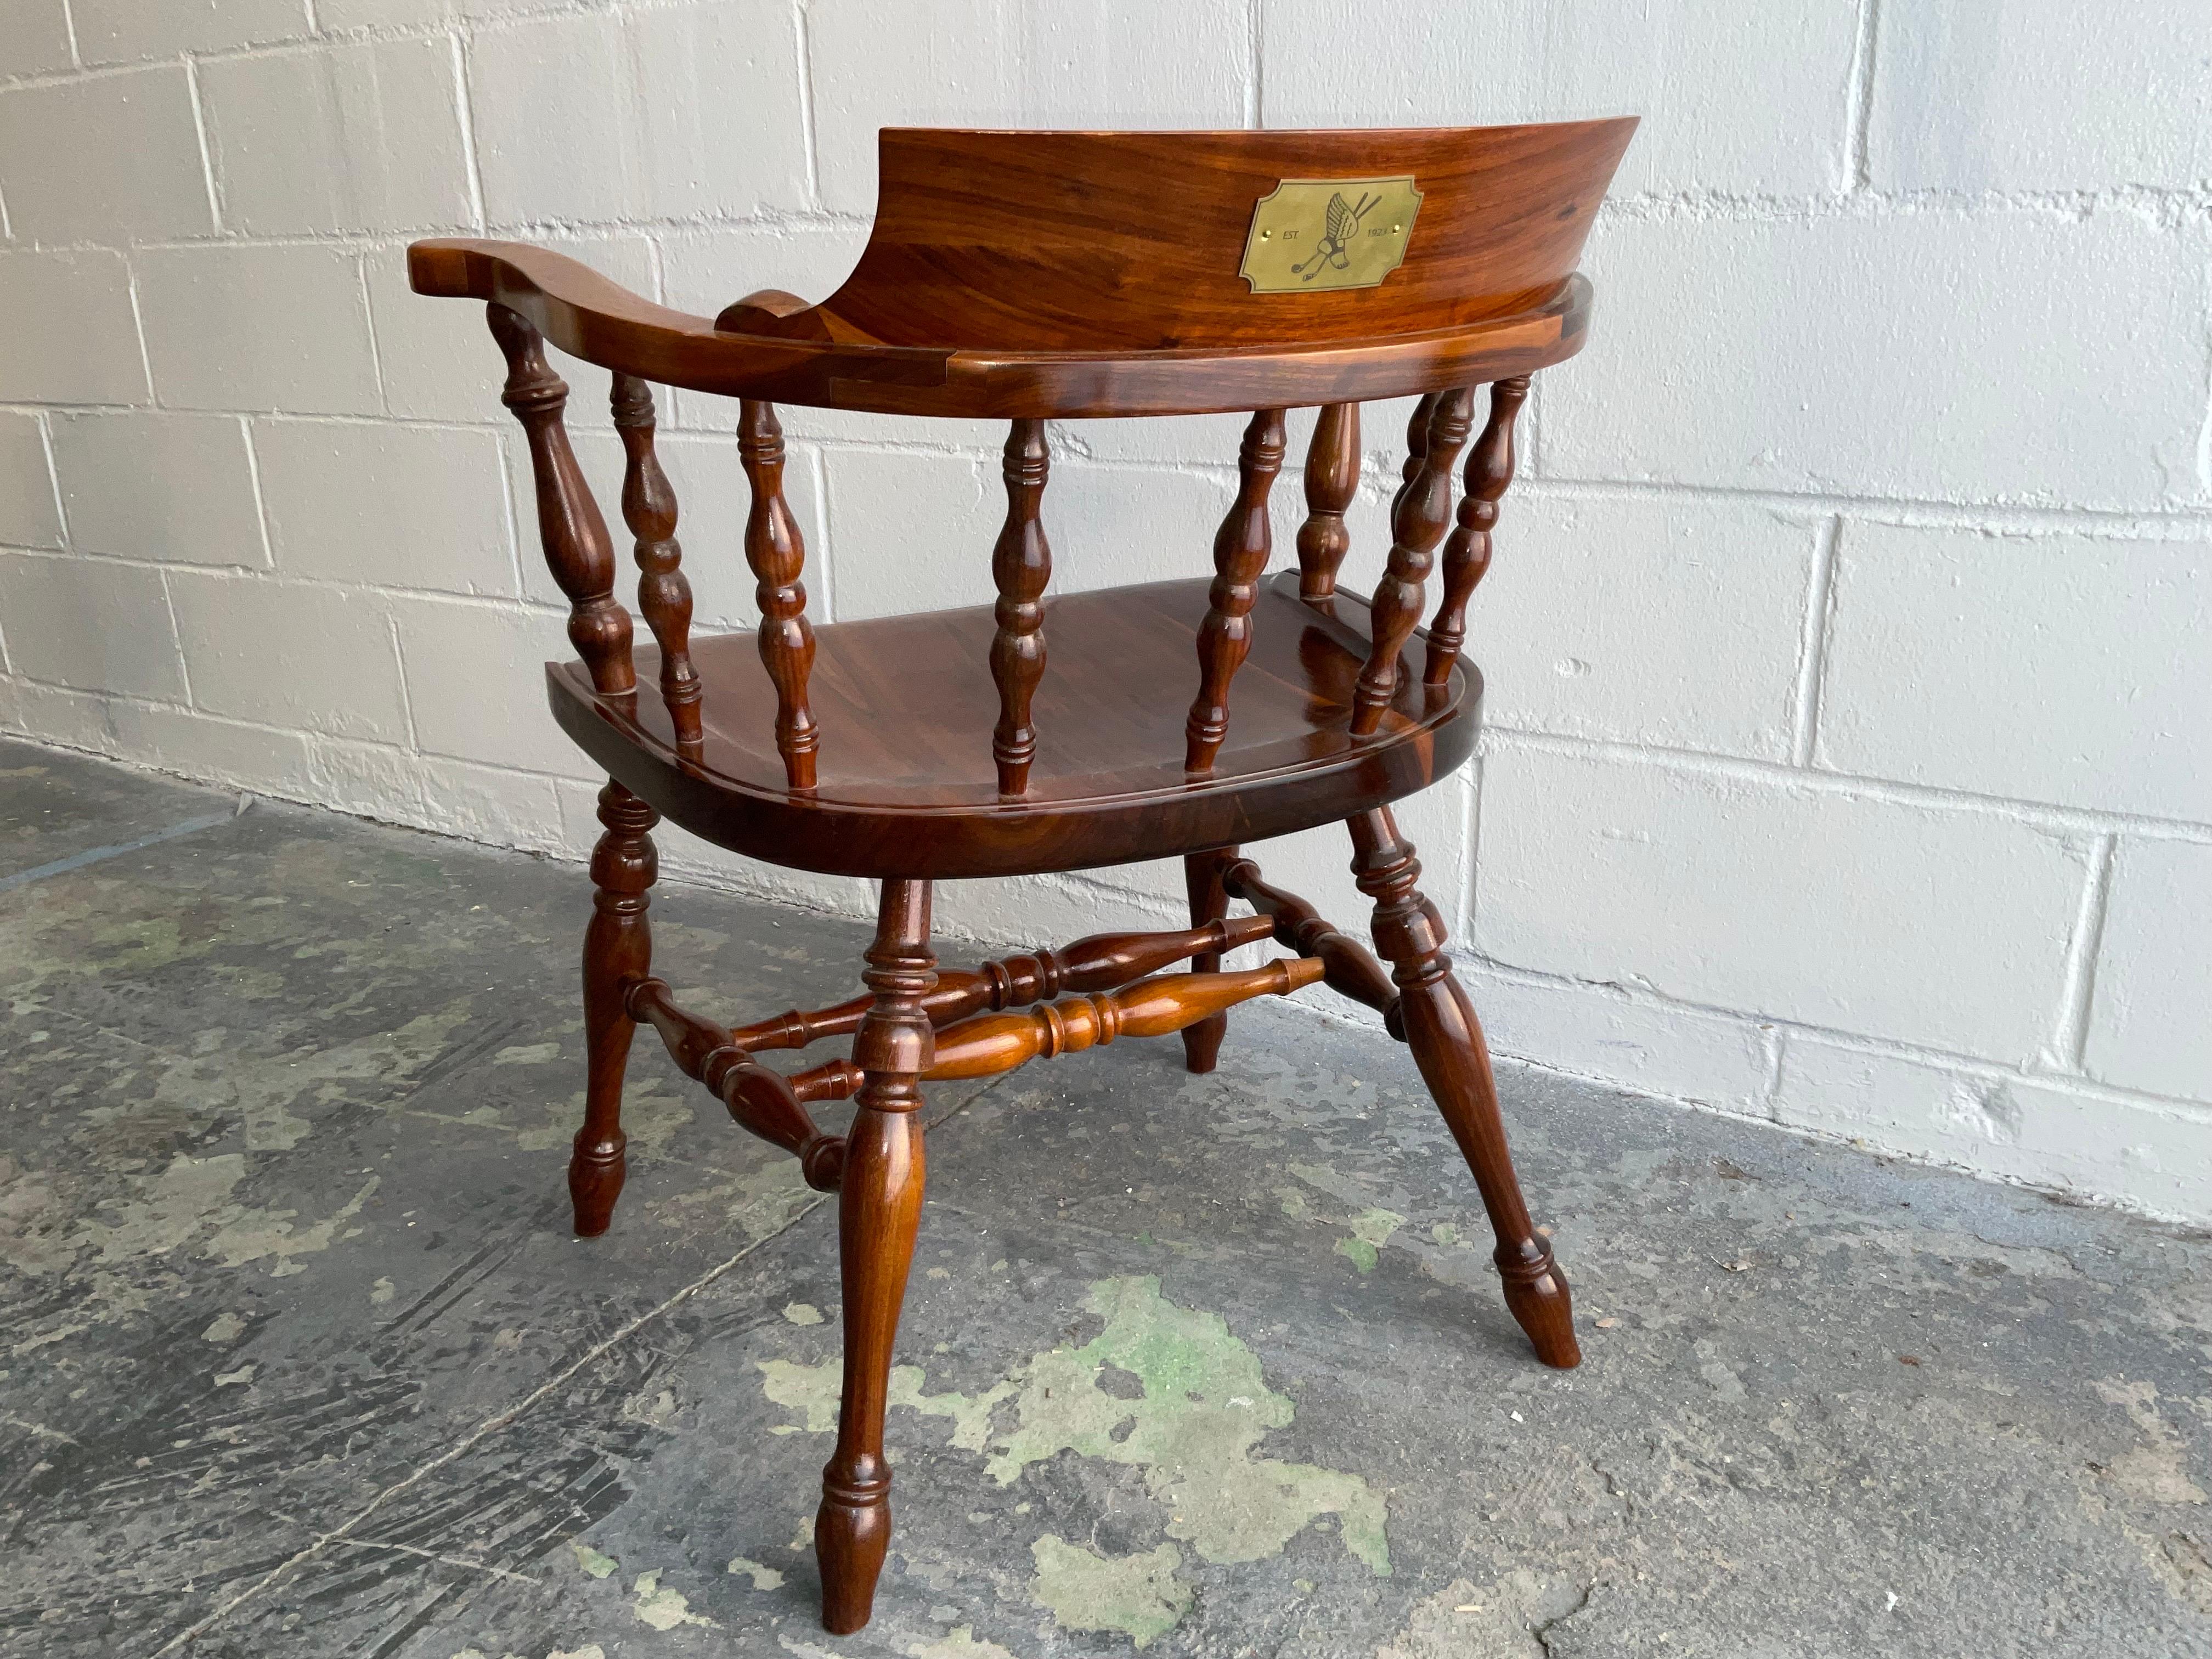 Studio-Made Captain’s Chairs in American Black Walnut, Winged Foot-2020 In New Condition For Sale In Brooklyn, NY